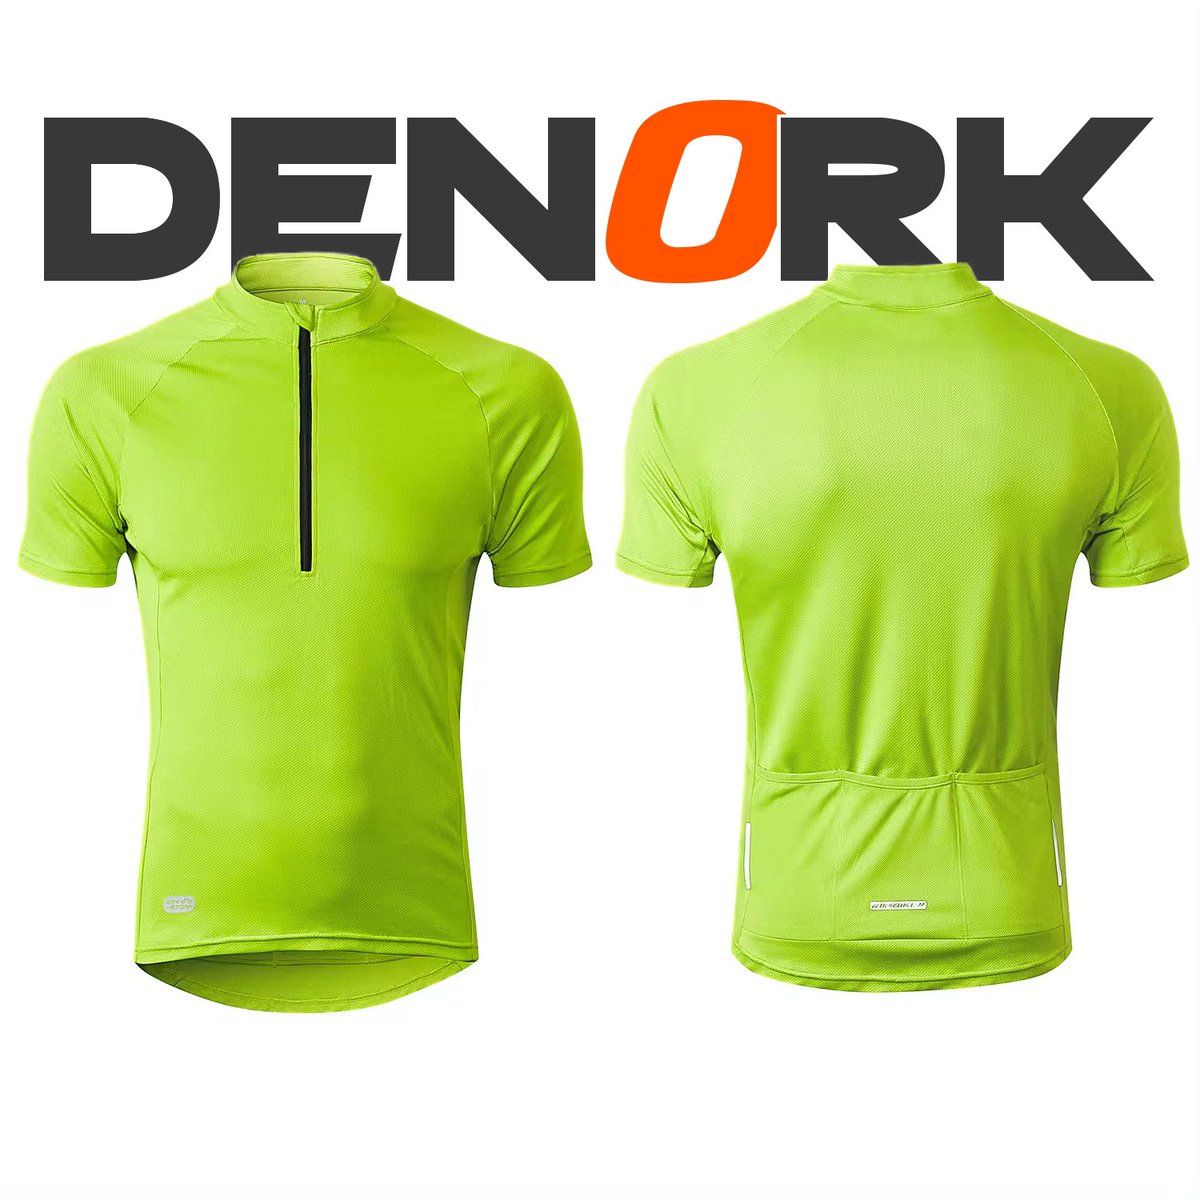 Wholesale Cycling Wears
High Quality
Discounted Price
All Sizes / All Colors / Custom Design & Logo
Wholesale Custom Clothings
Denork Industry #cyclingwear #cycling #cyclinglife #cyclingapparel #cyclingphotos #cyclingpics #cyclingkit #cyclingstyle #cyclingshots #cyclingaddict